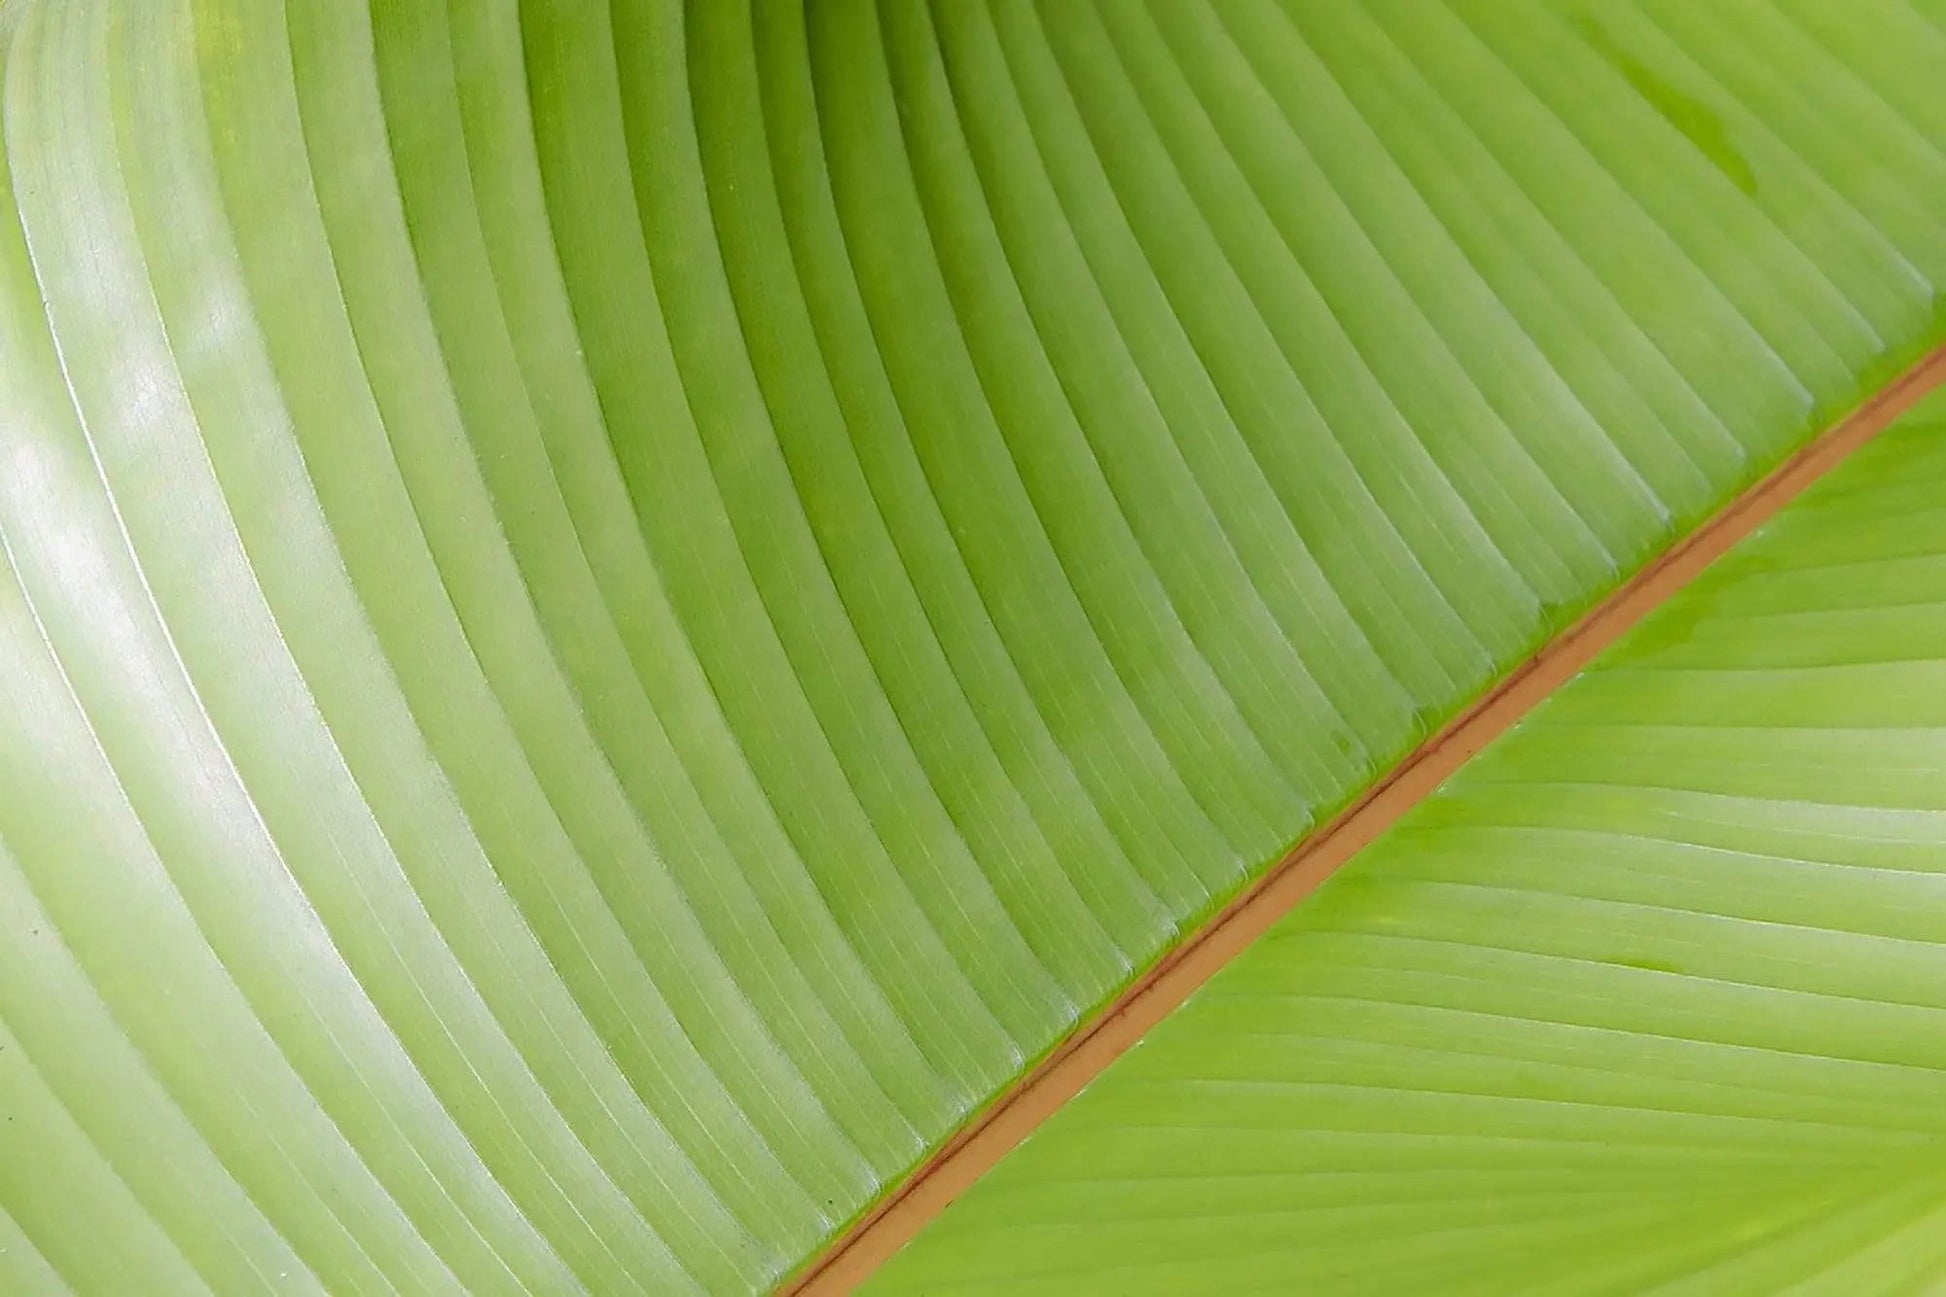 Banana Leaves color bright green orange abstract fine art photography